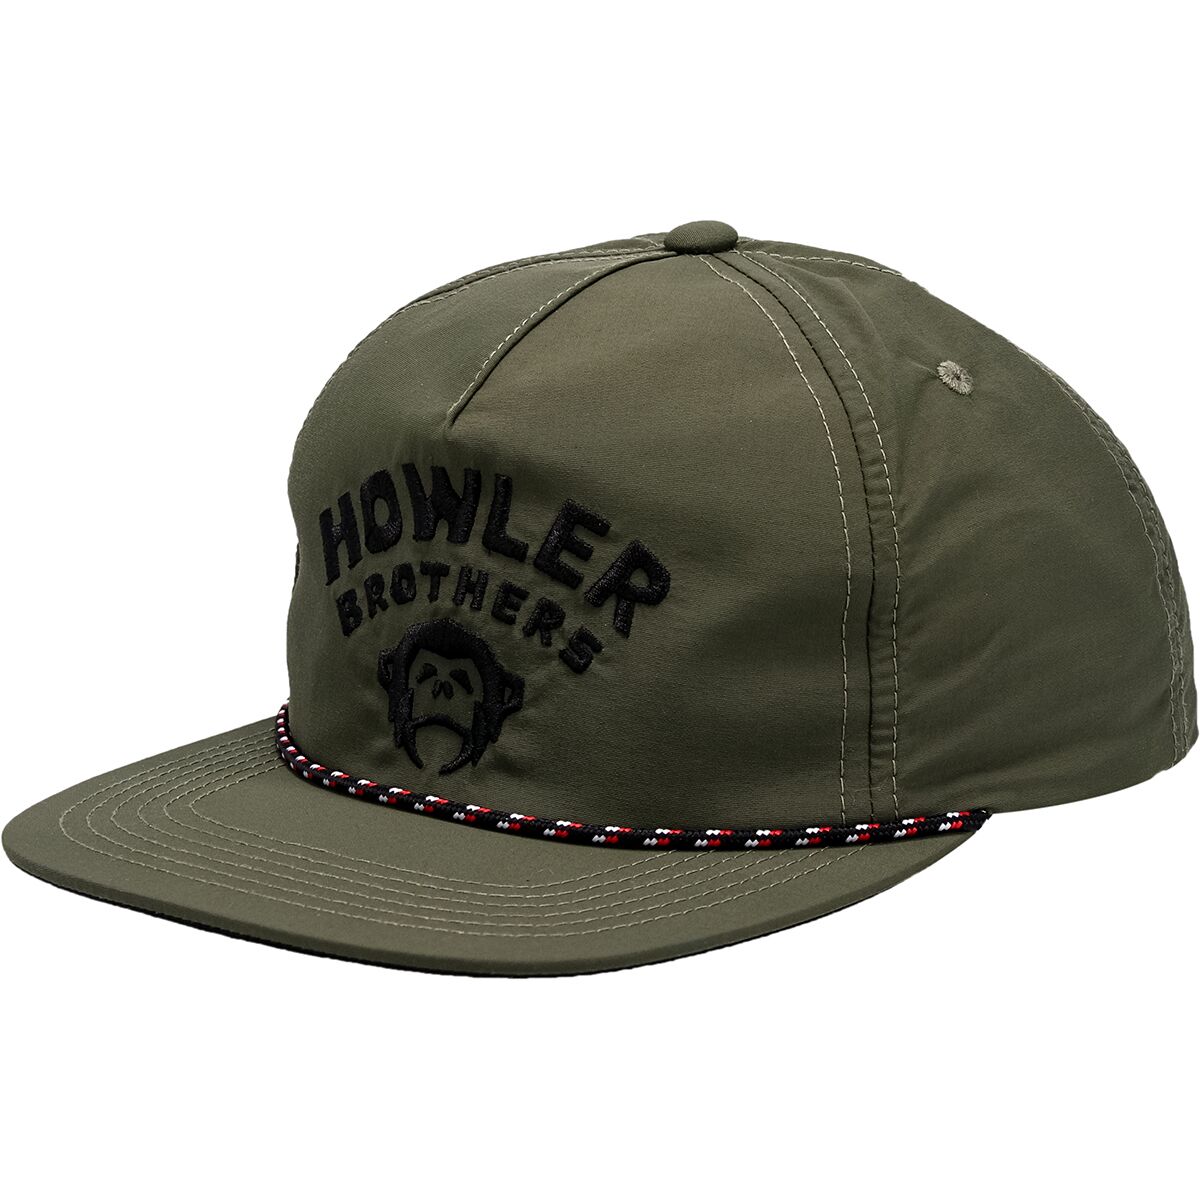 Howler Brothers Camp Howler Unstructured Snapback Hat